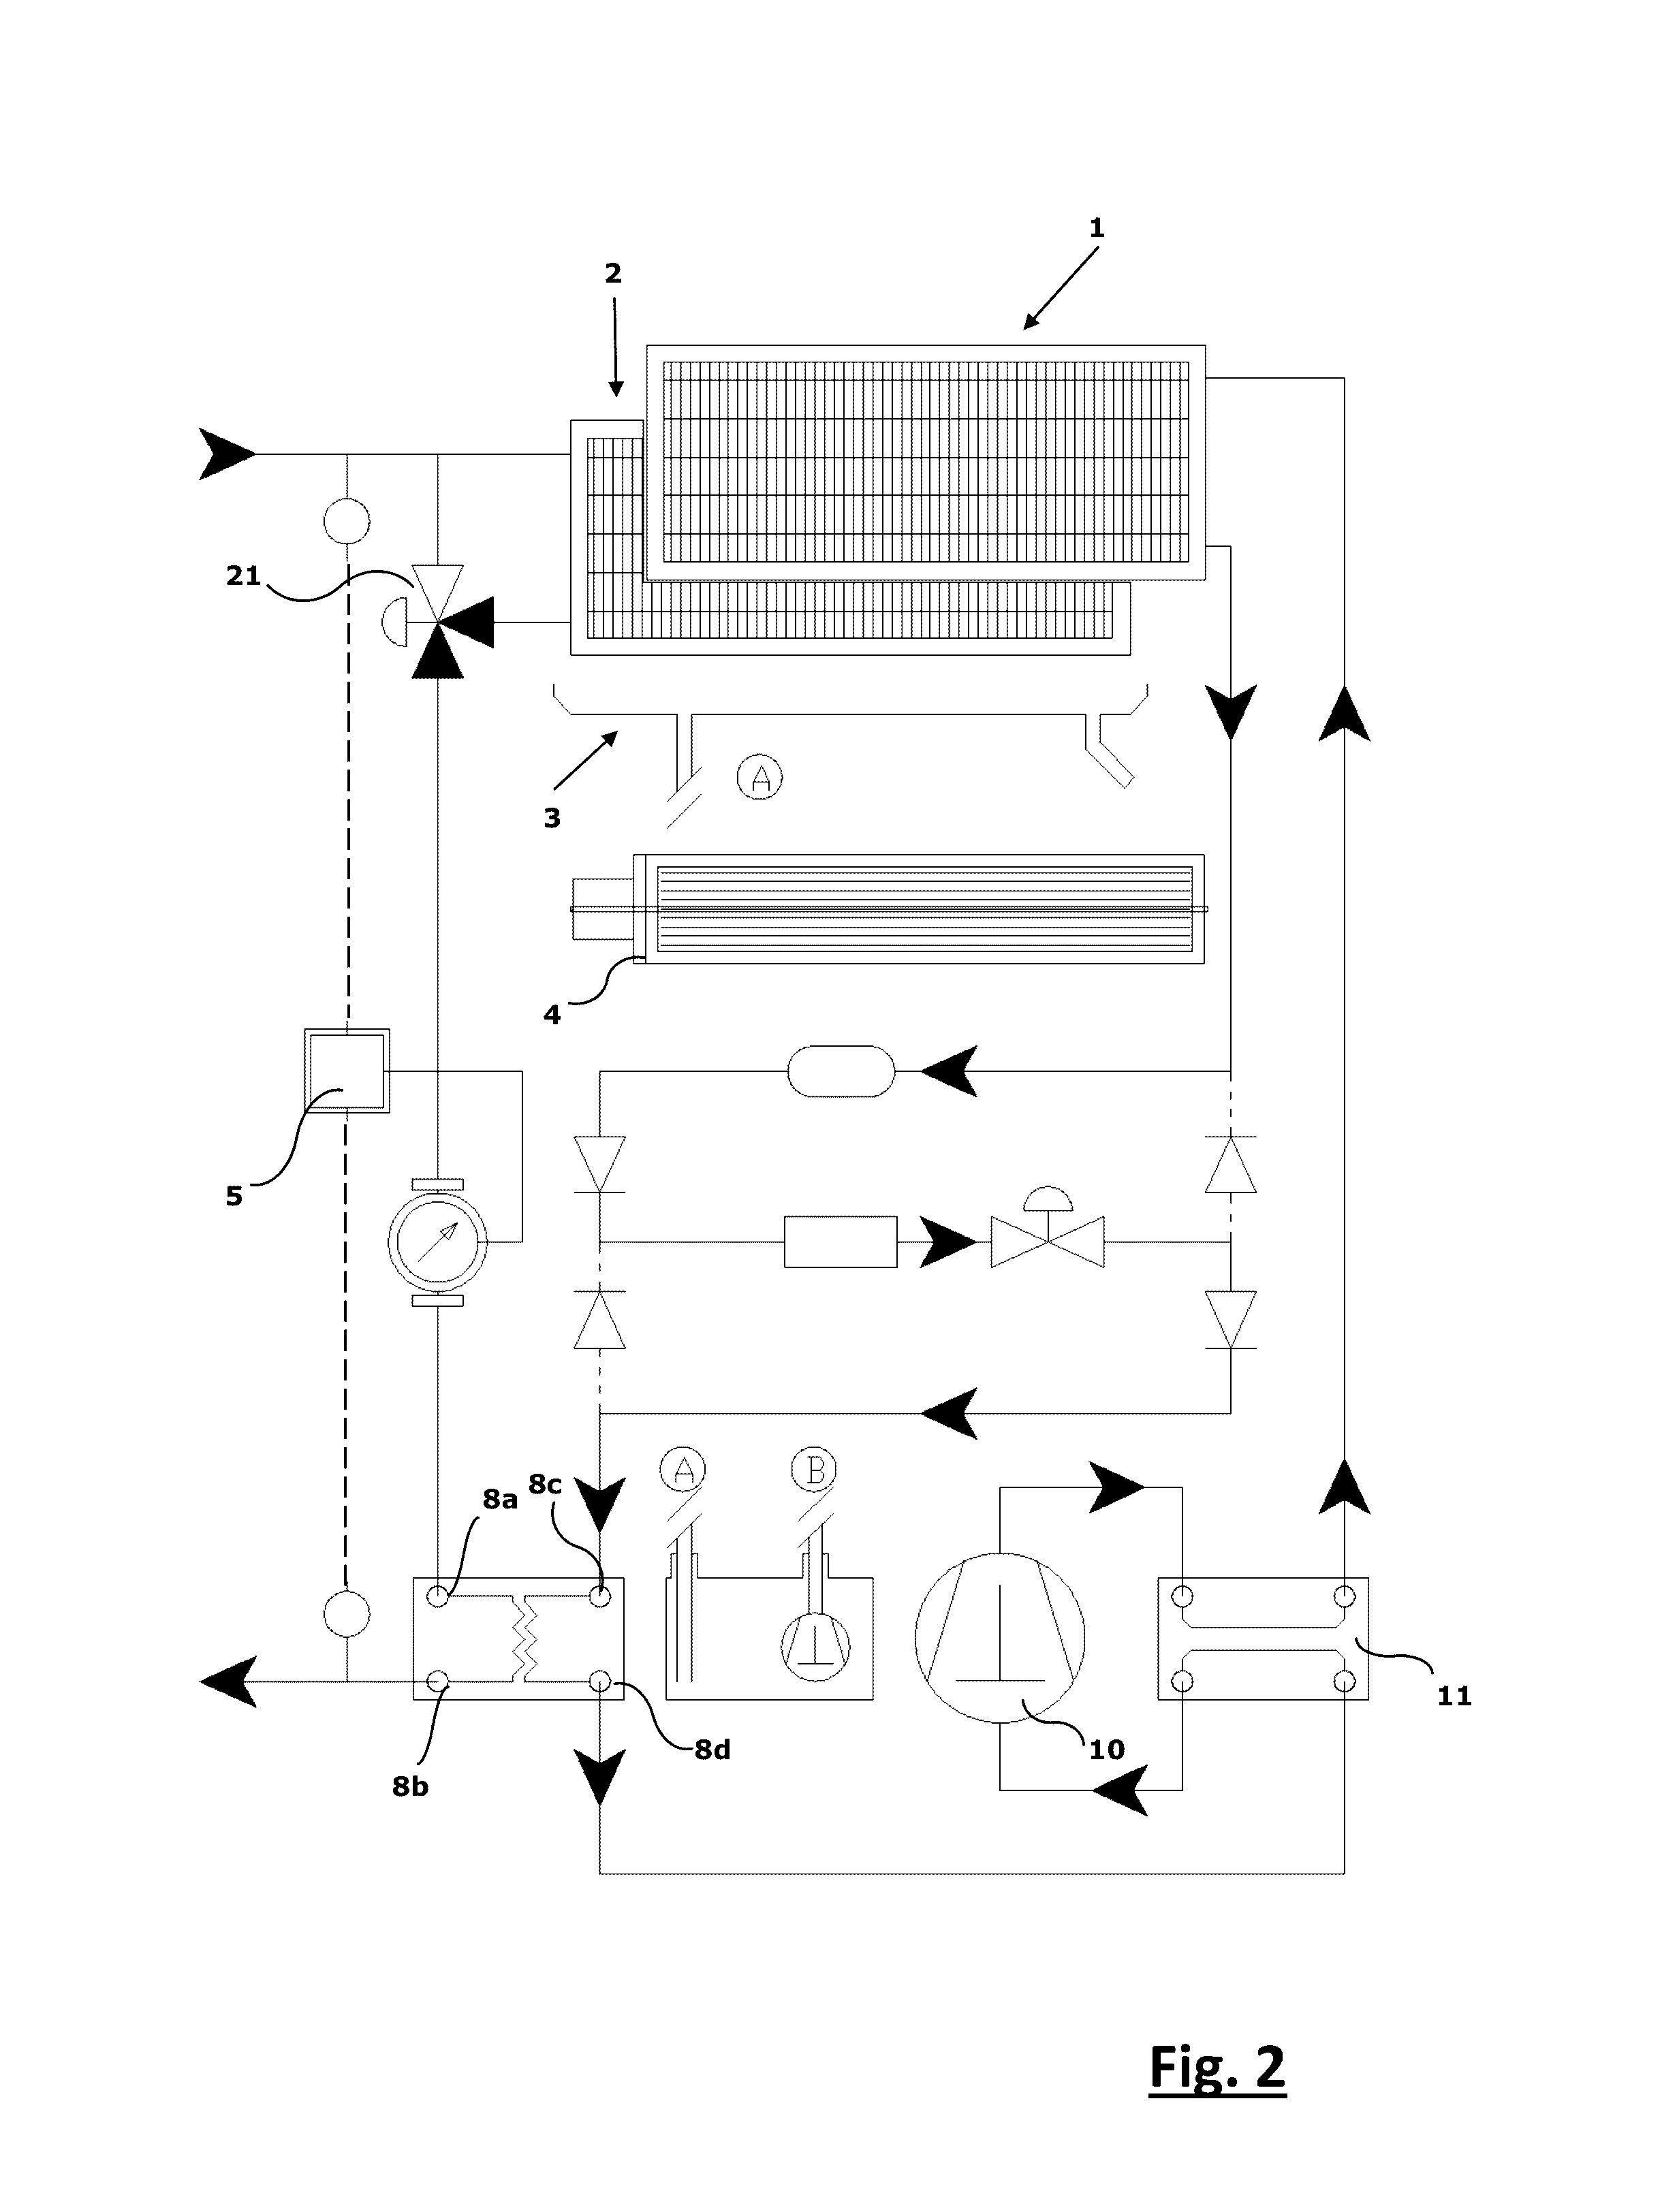 Air conditioning system, peripheral air-conditioning unit thereof and water pipeline upgrading method for heating purposes